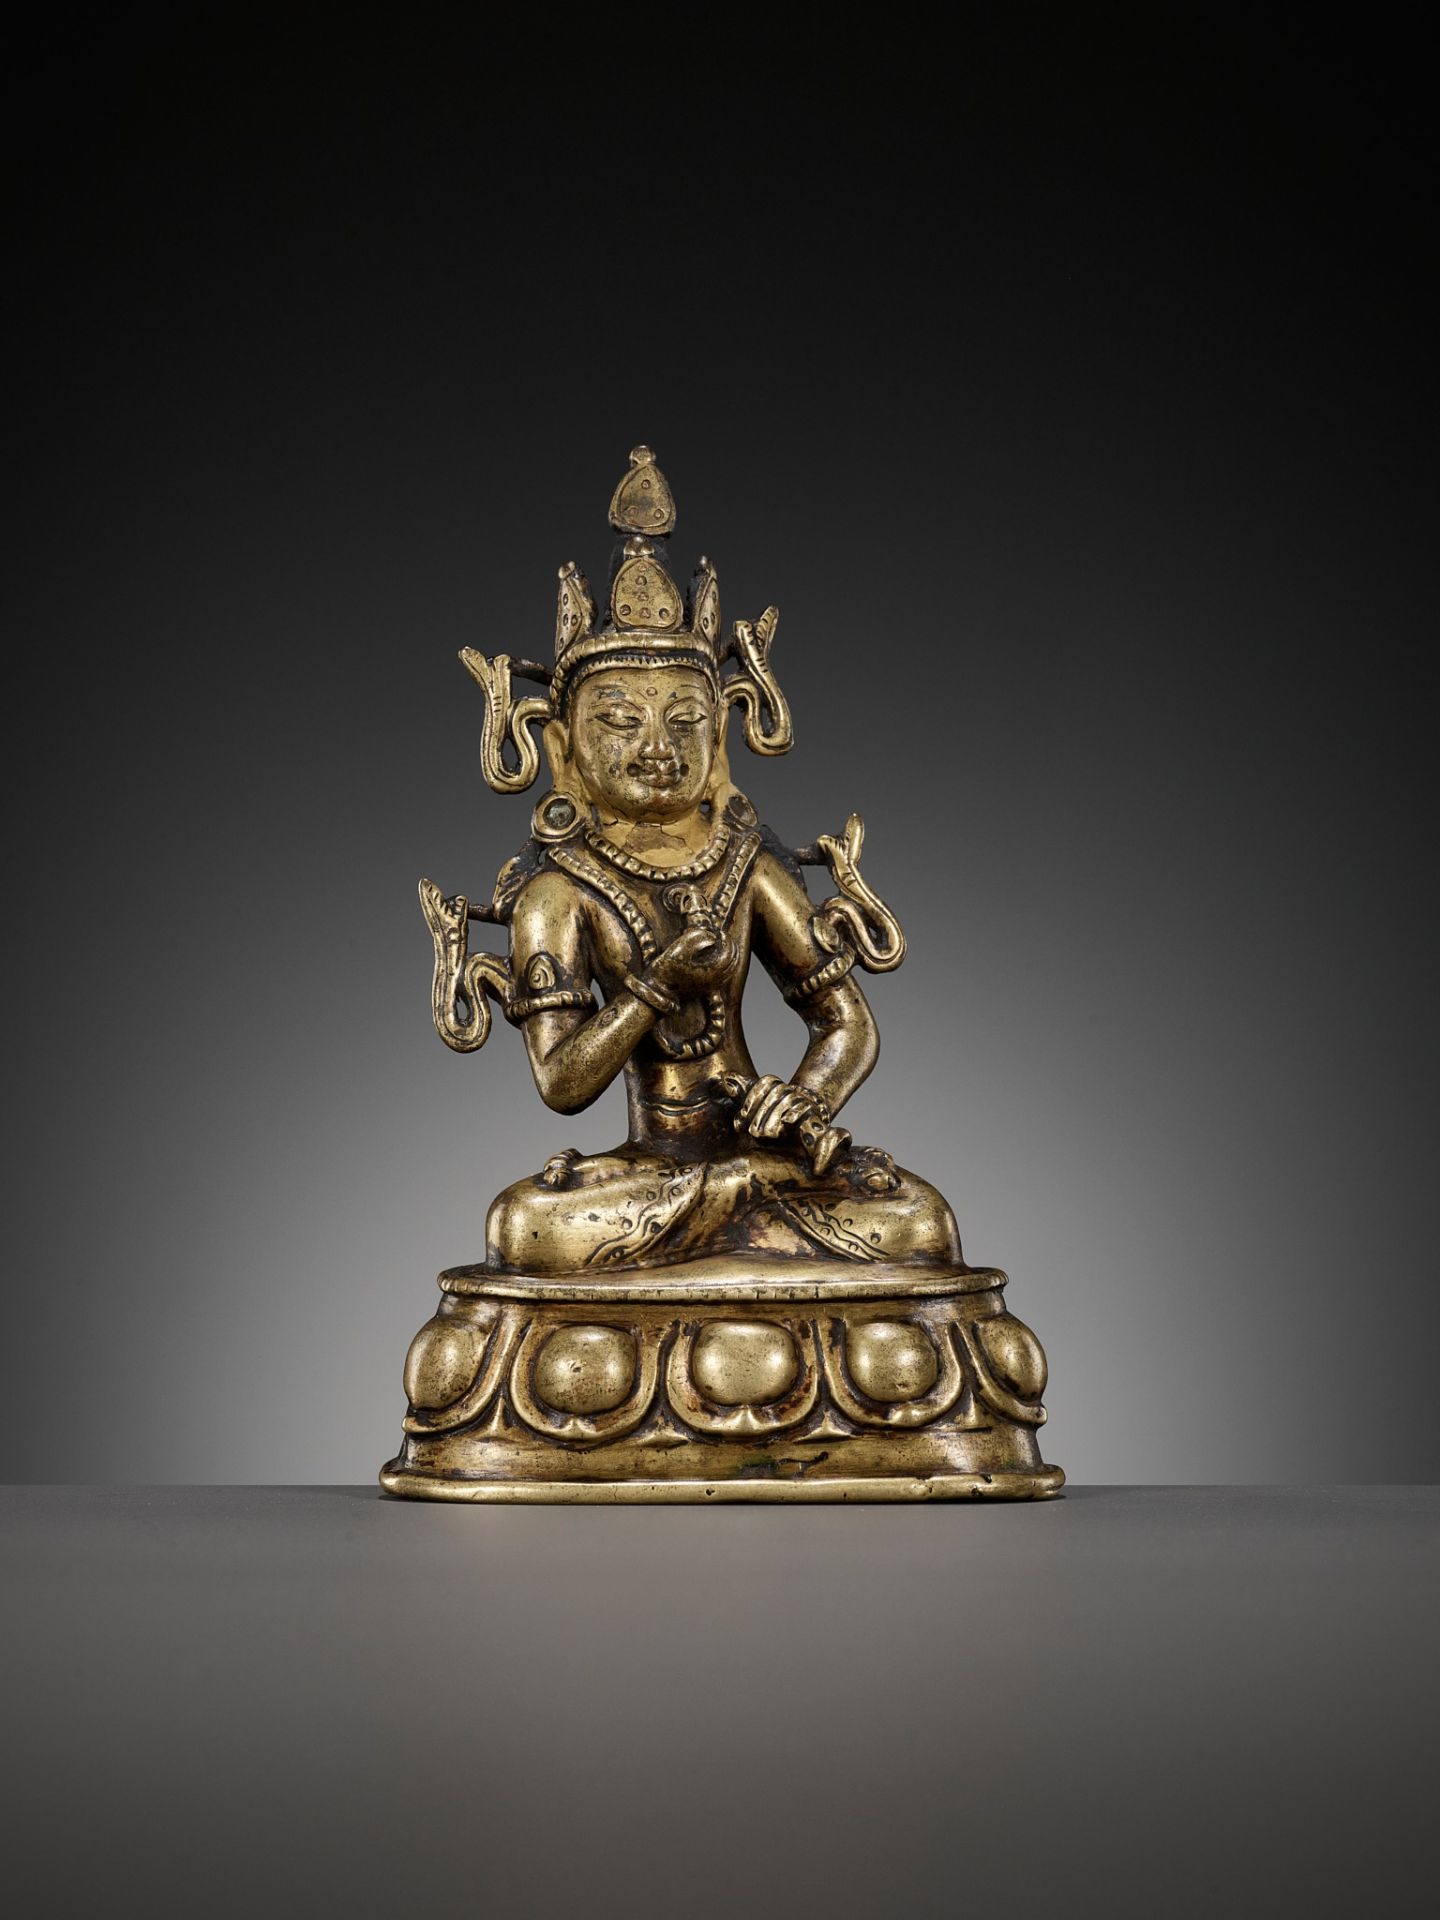 A GILT-BRONZE AND TURQUOISE-INLAID FIGURE OF VAJRASATTVA, KASHMIR STYLE, WEST TIBET, 12TH CENTURY - Image 9 of 10